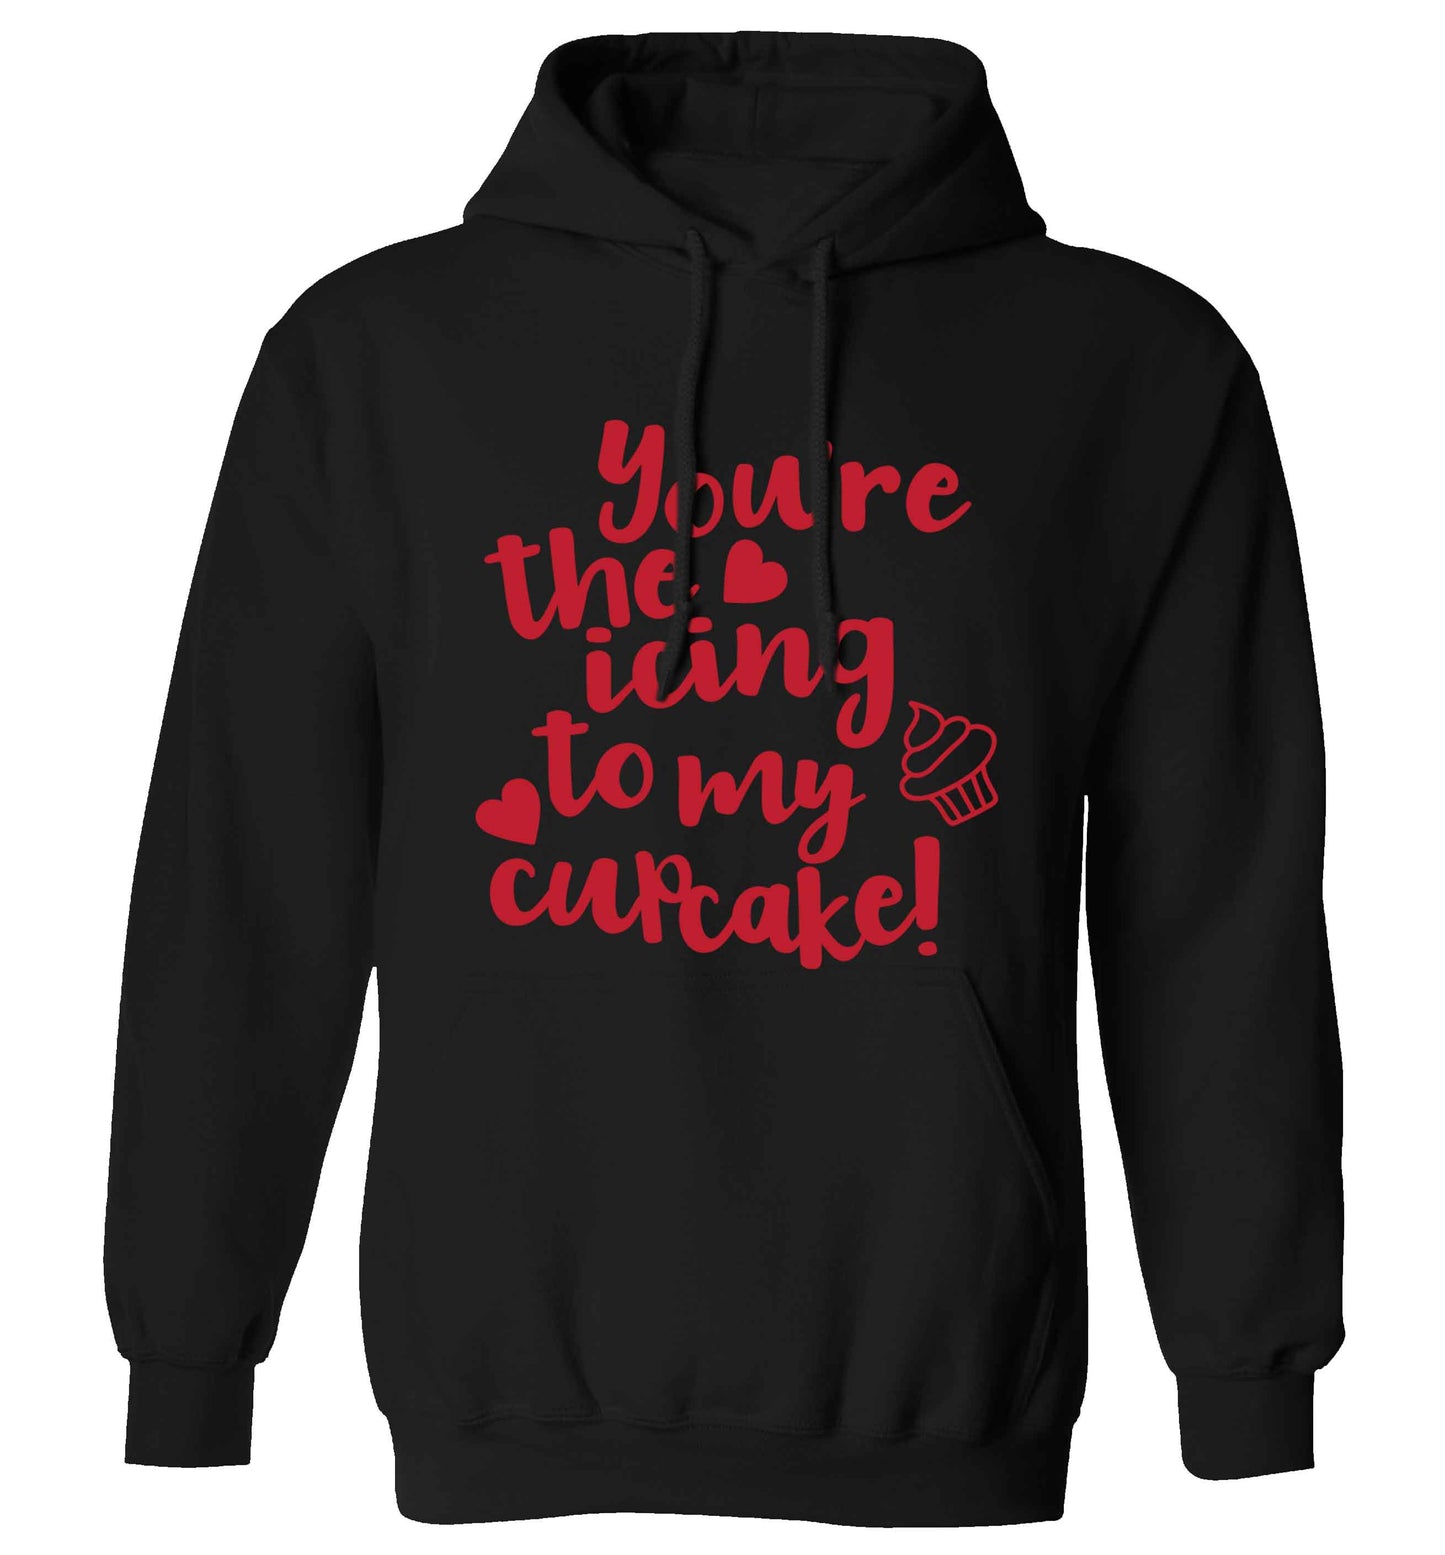 You're the icing to my cupcake adults unisex black hoodie 2XL